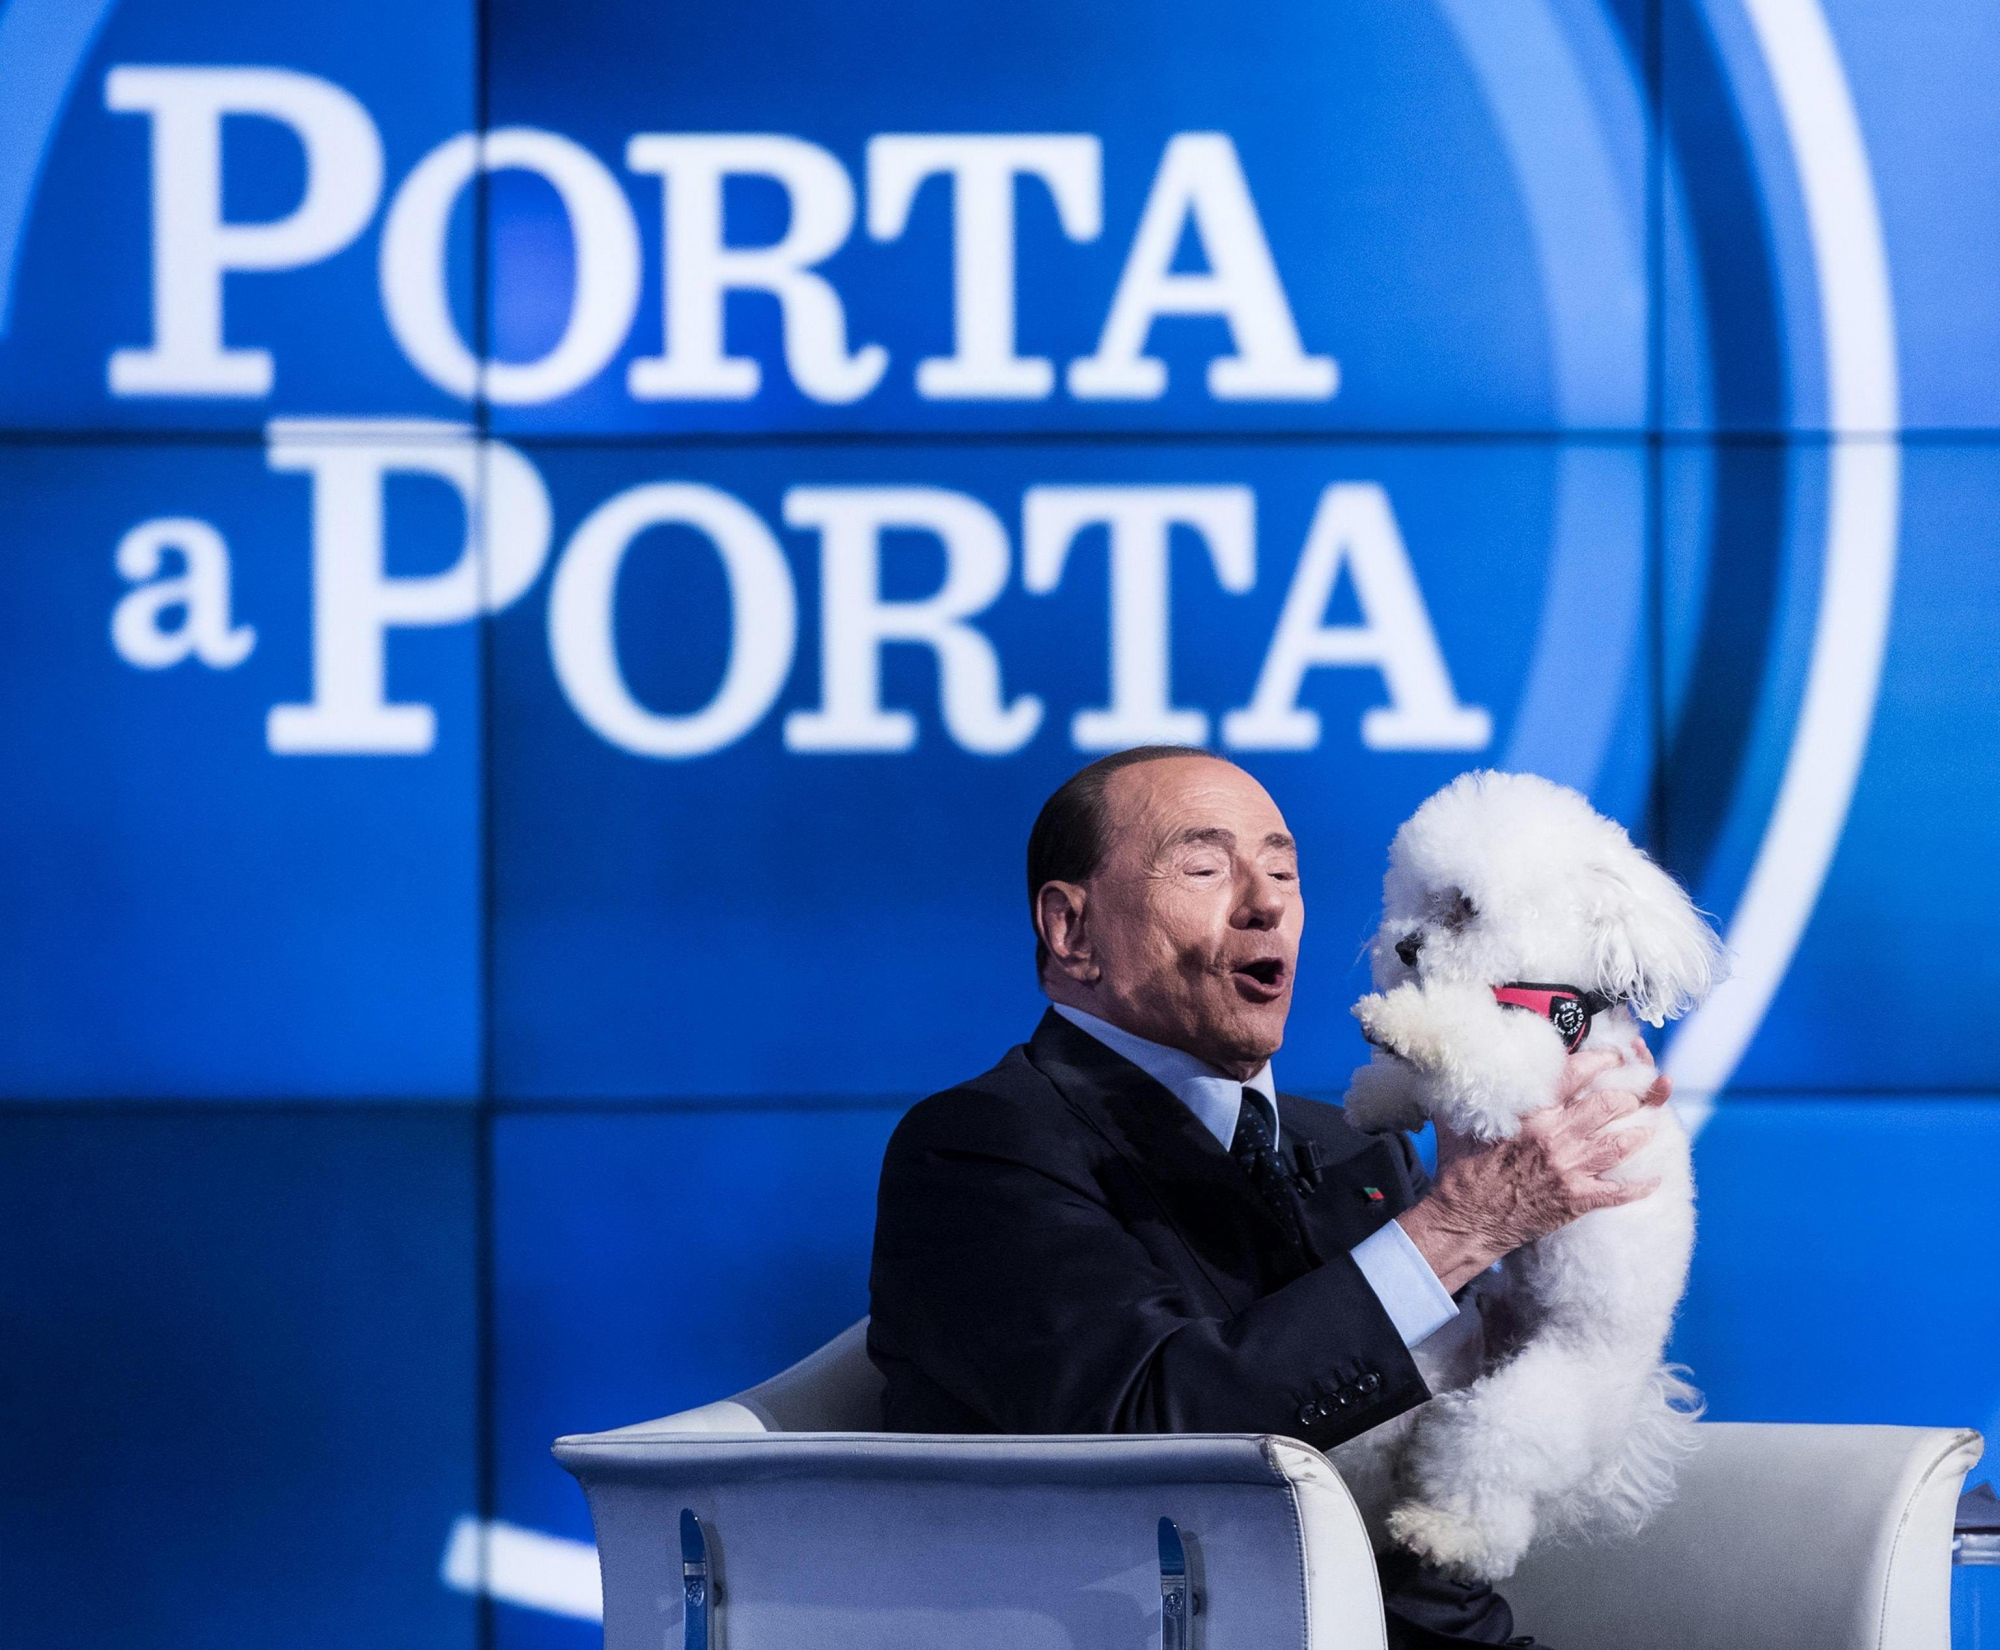 epa06041685 Italian former prime minister and leader of 'Forza Italia' party Silvio Berlusconi plays with a dog during the recording of Rai TV program 'Porta a Porta' in Rome, Italy, 21 June 2017, hosted by journalist Bruno Vespa.  EPA/ANGELO CARCONI ITALY PEOPLE BERLUSCONI